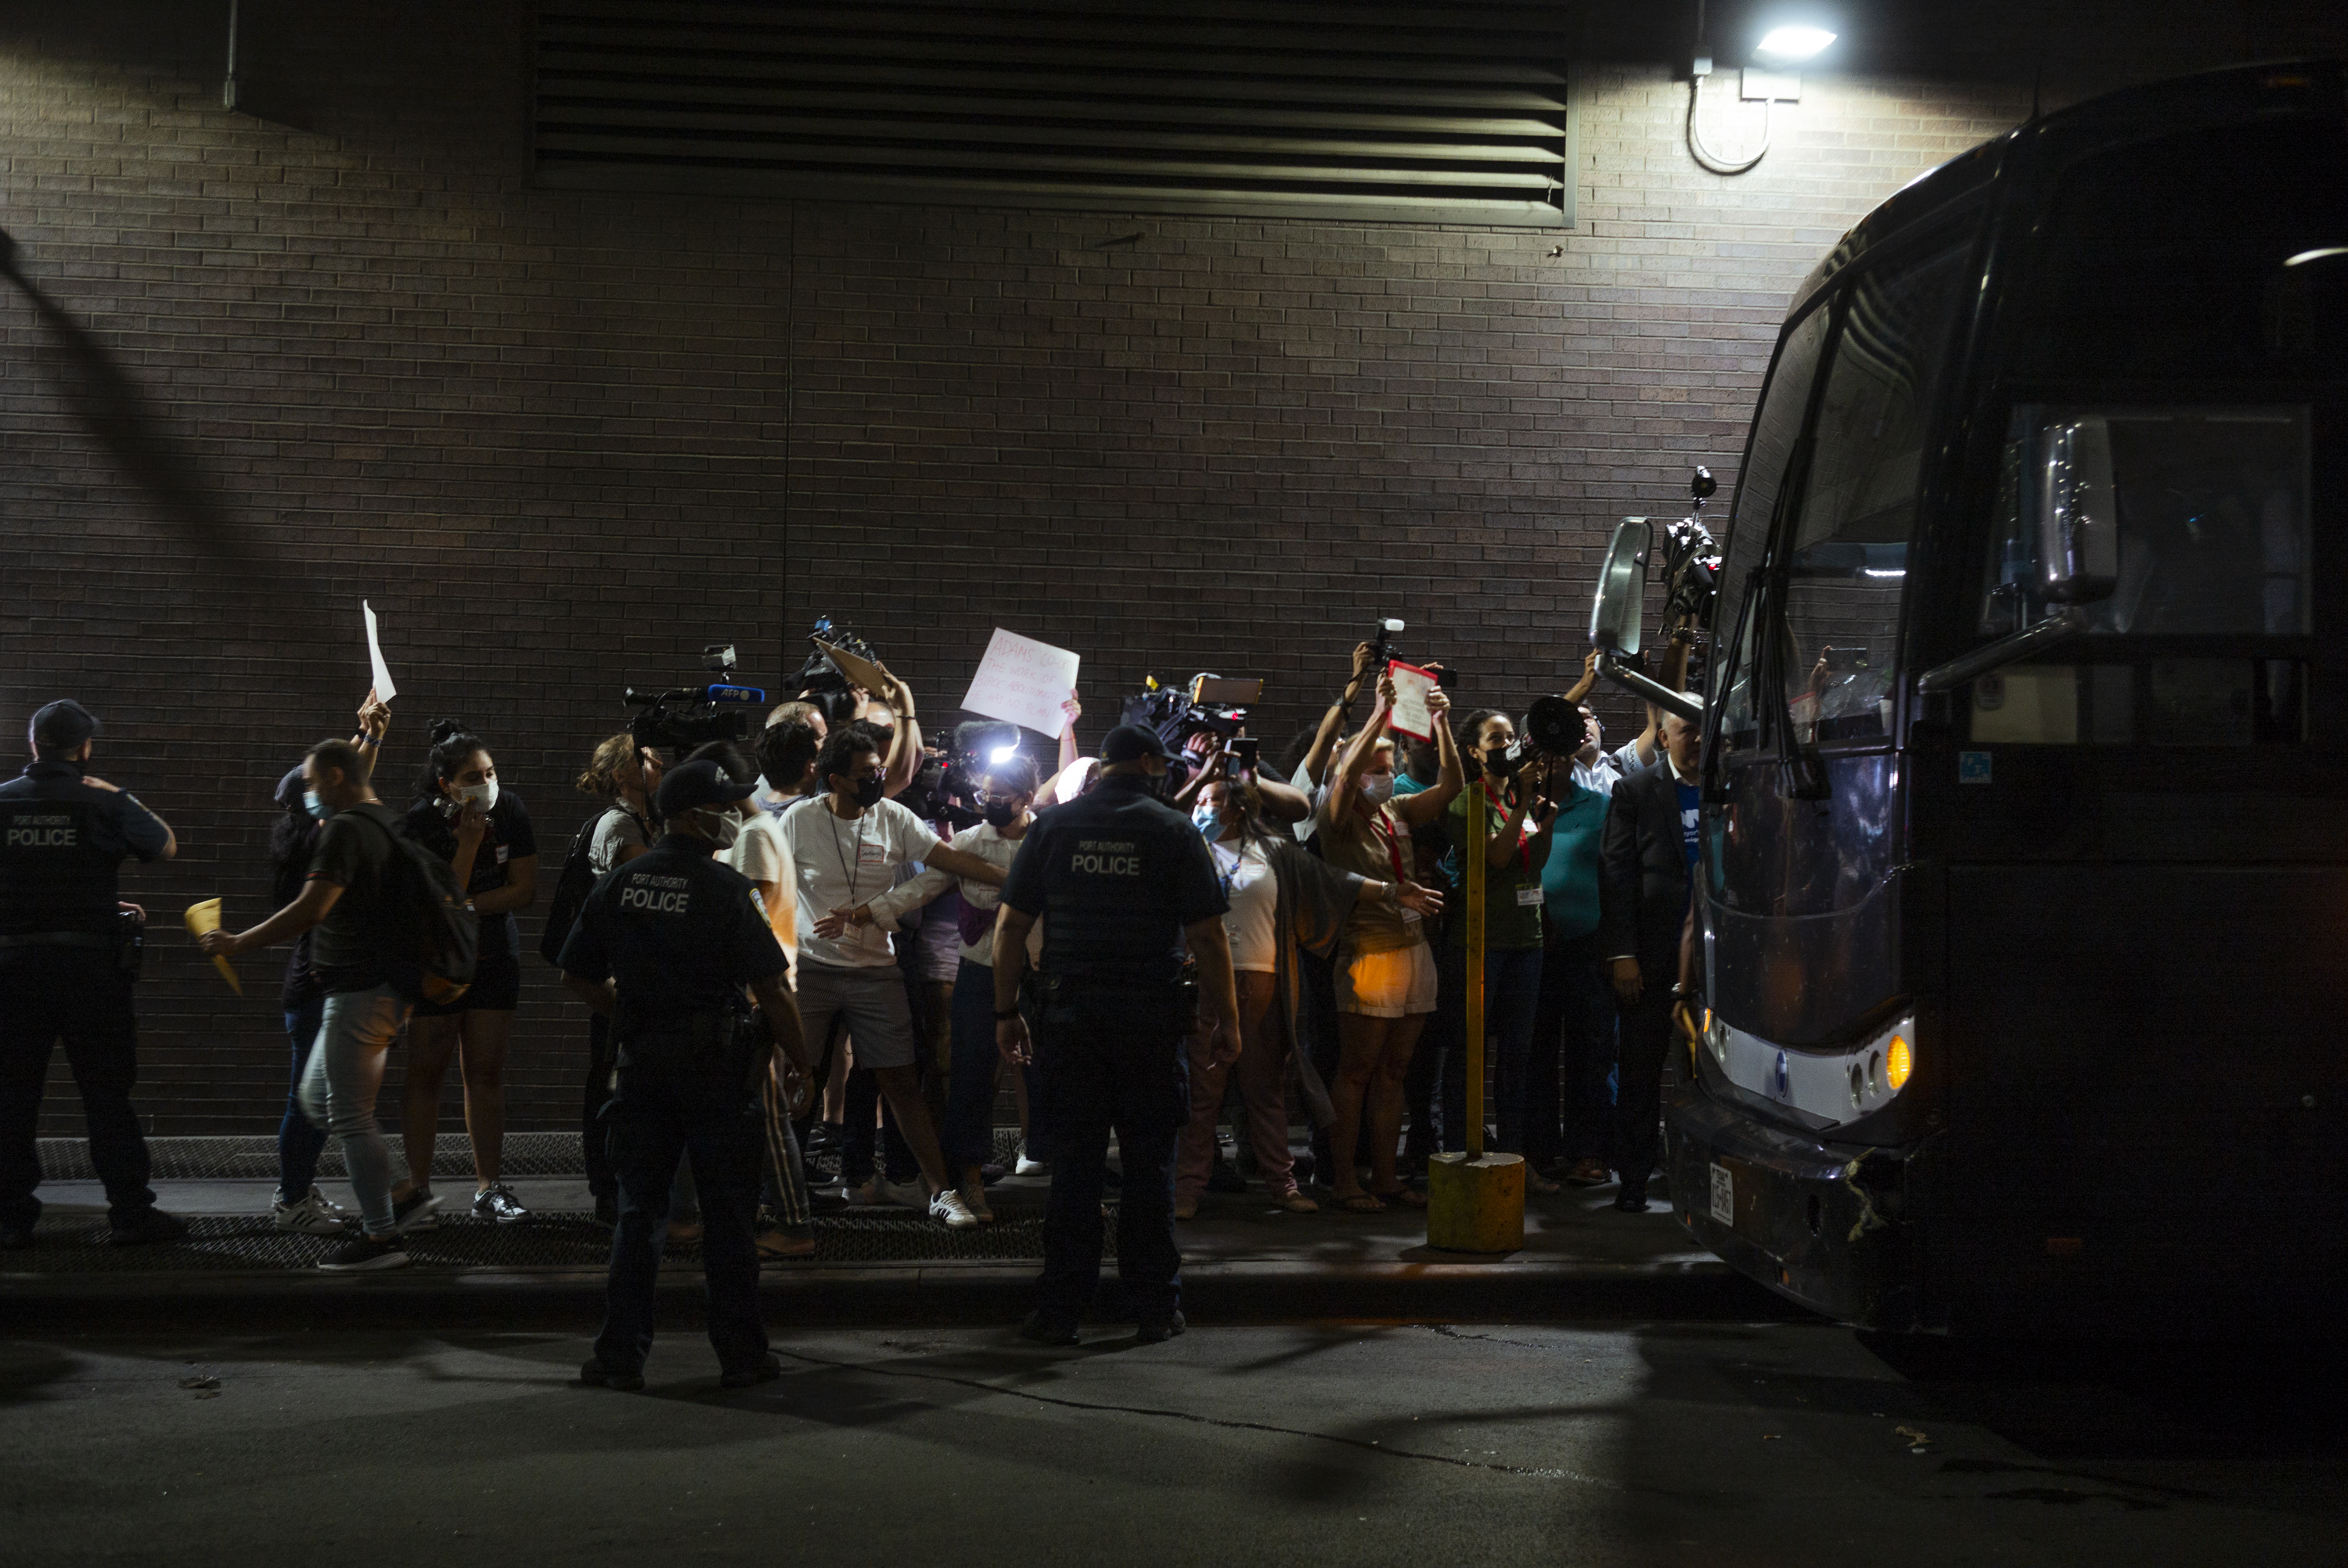 Media and immigrant rights activists gather outside one of the three busses that arrived at Port Authority, from Texas, on Tuesday carrying 80-100 asylum seekers from Central and South America.